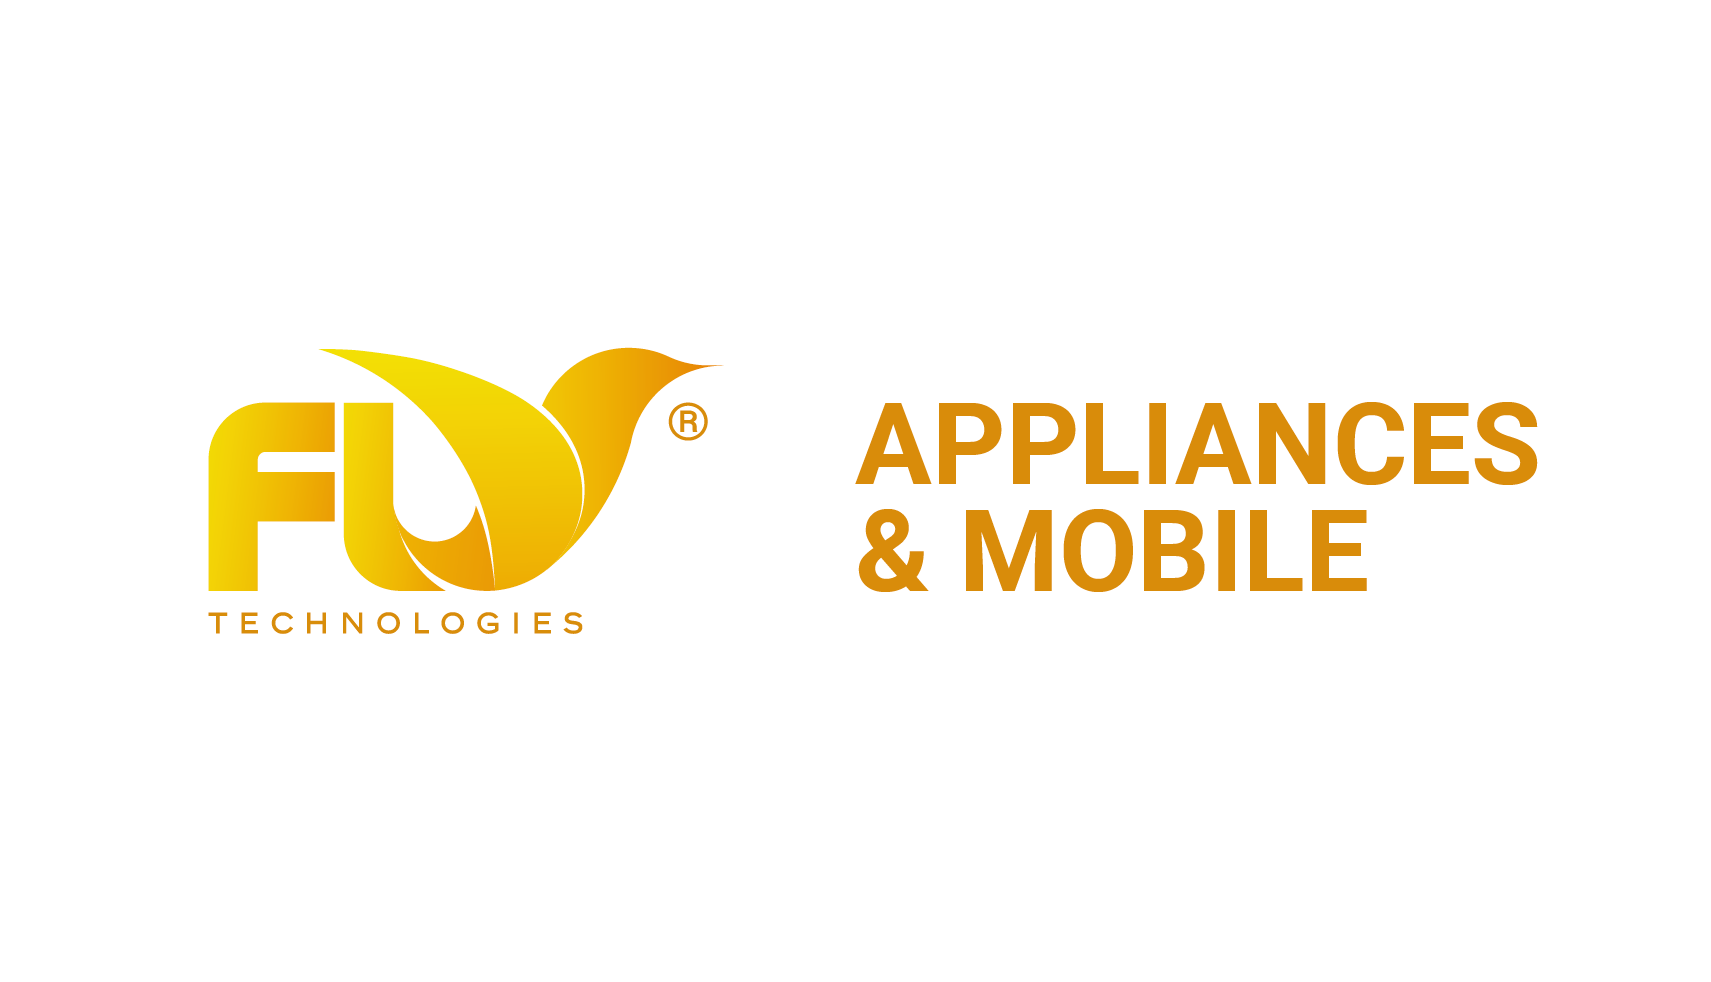 Fly Technologies Appliances & Mobile